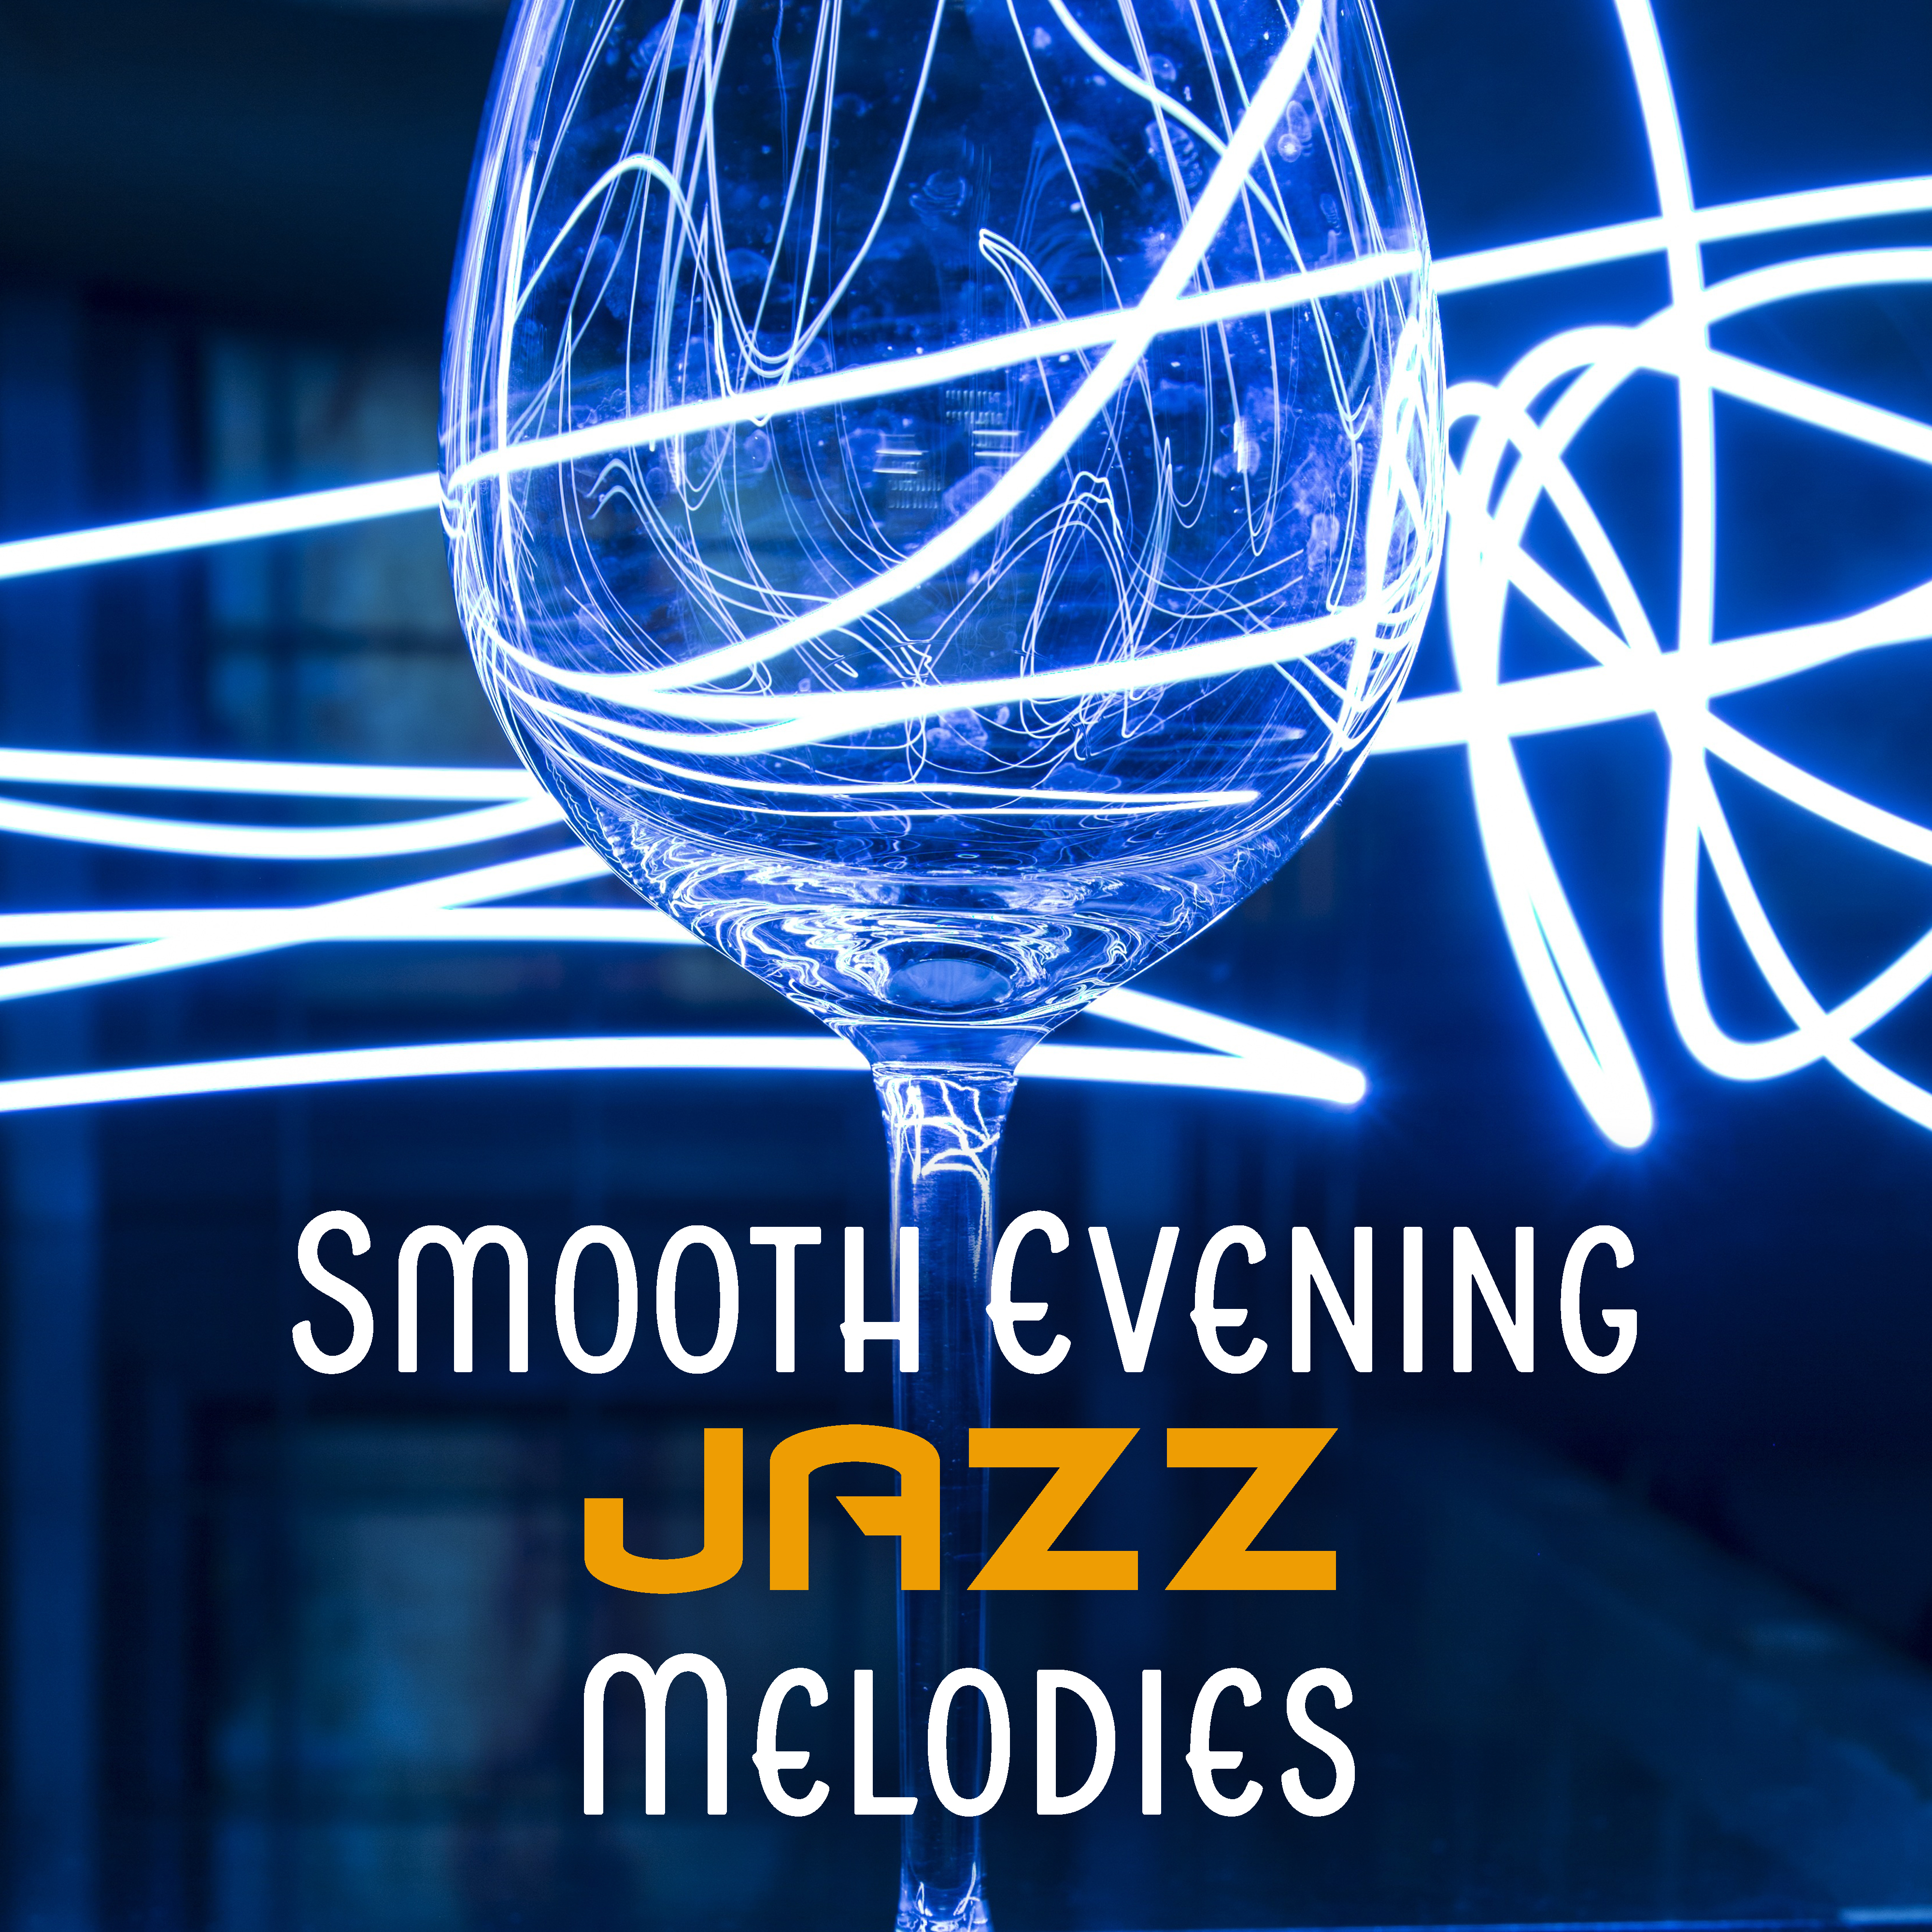 Smooth Evening Jazz Melodies  Easy Listening, Smooth Jazz Night, Relaxing Sounds, Stress Relief